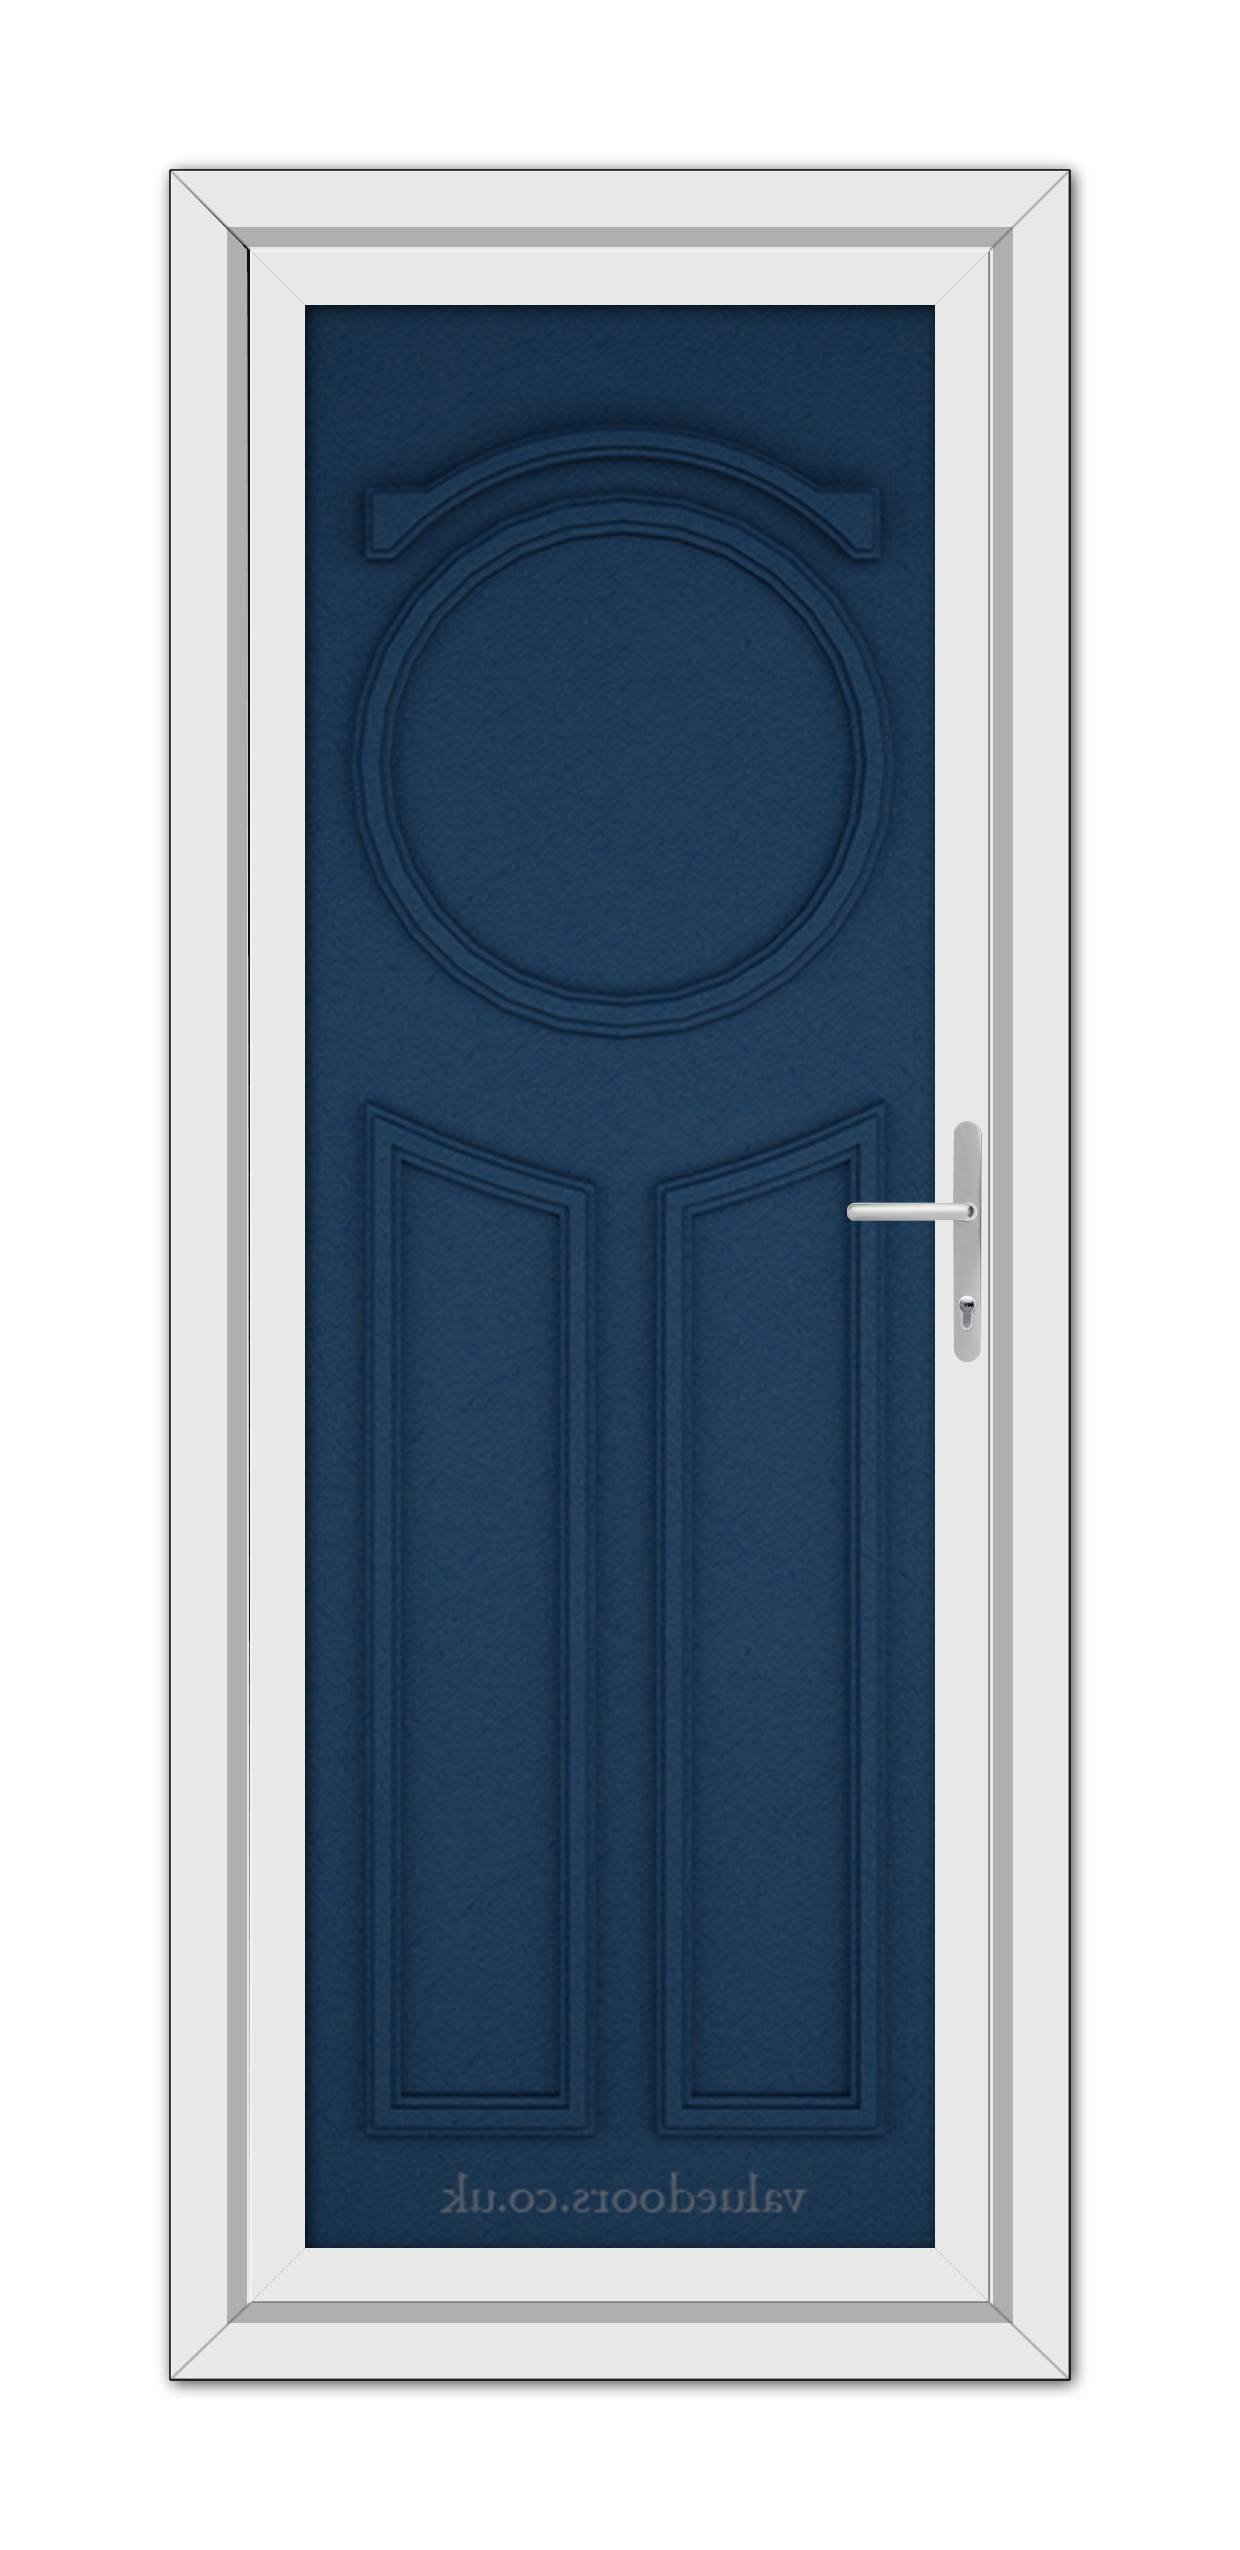 A vertical image of a Blue Blenheim Solid uPVC Door with an oval window, set in a white frame, featuring a silver handle on the right.